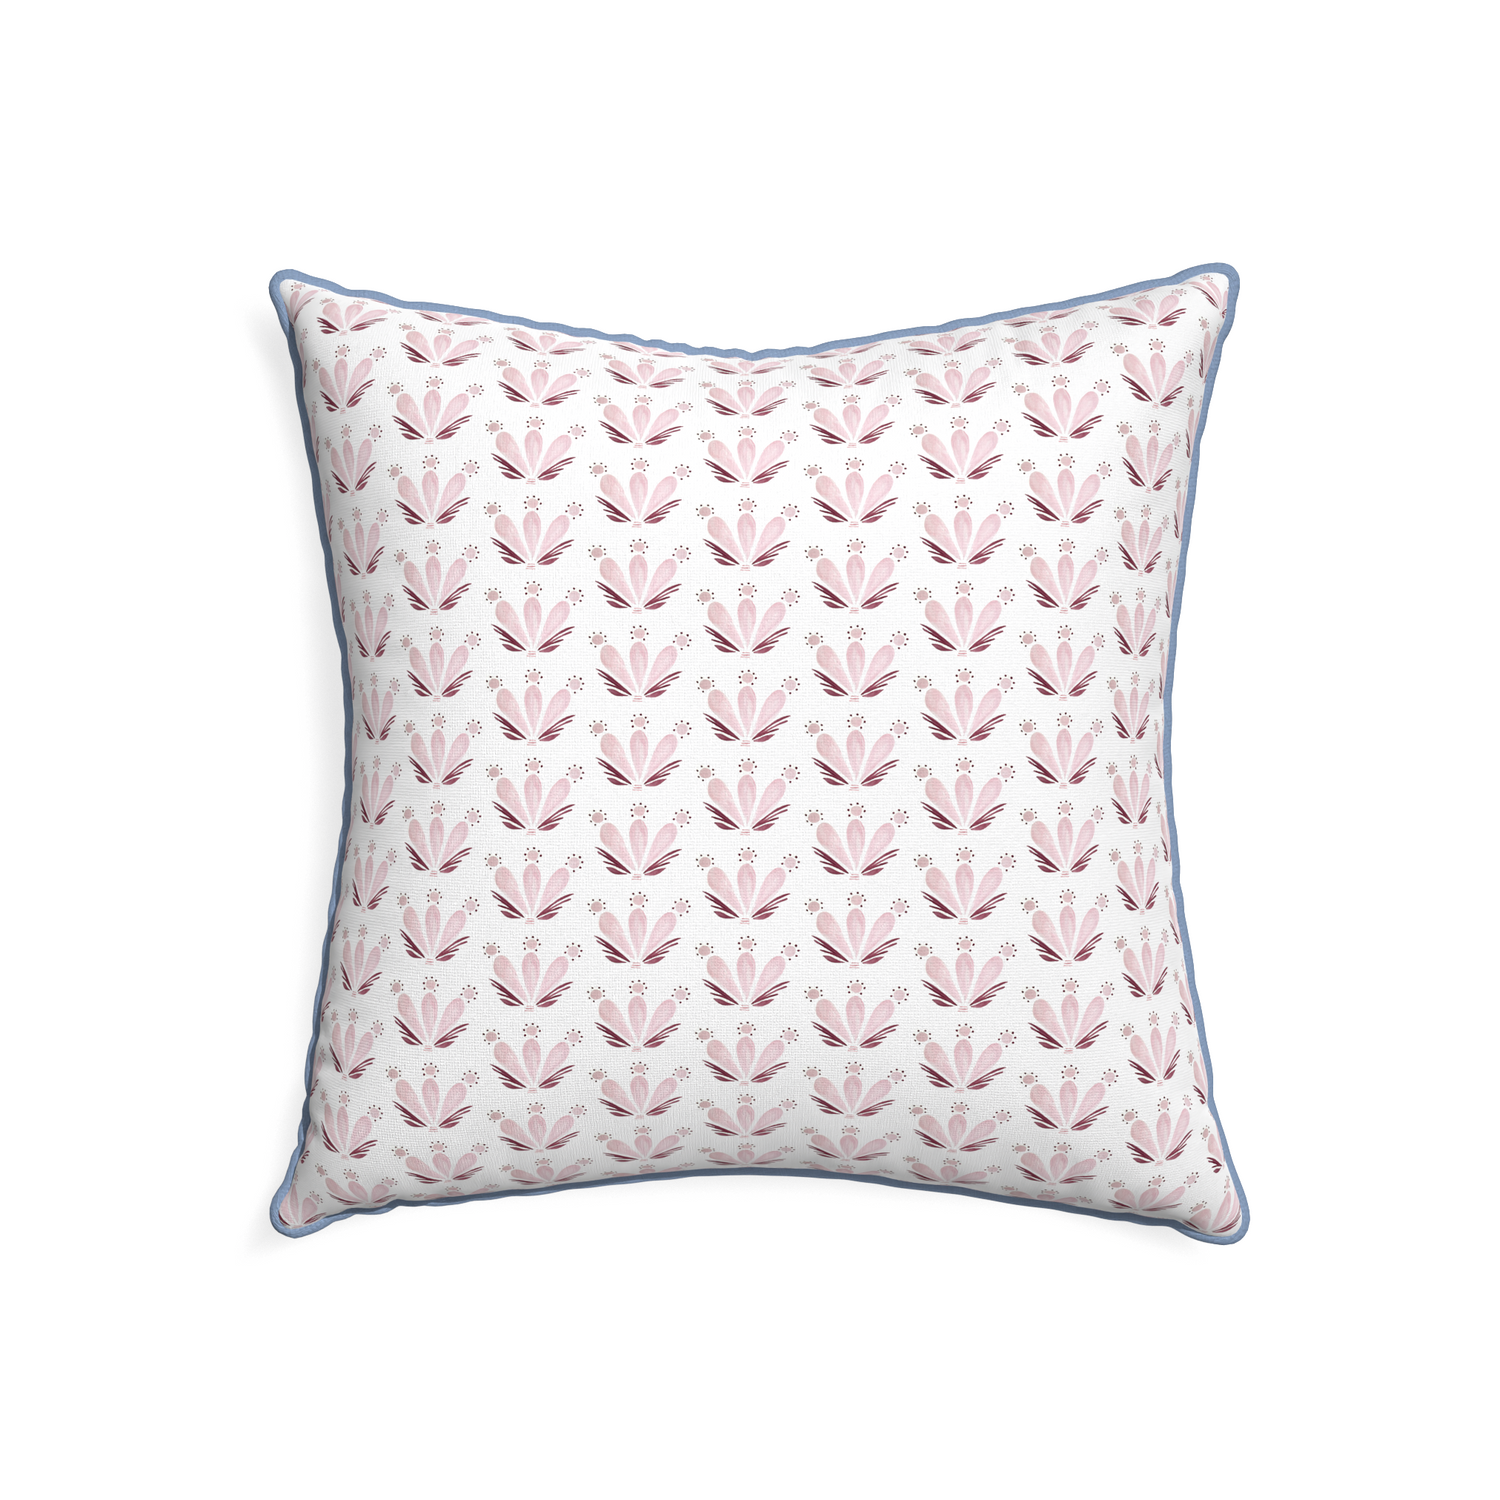 22-square serena pink custom pink & burgundy drop repeat floralpillow with sky piping on white background